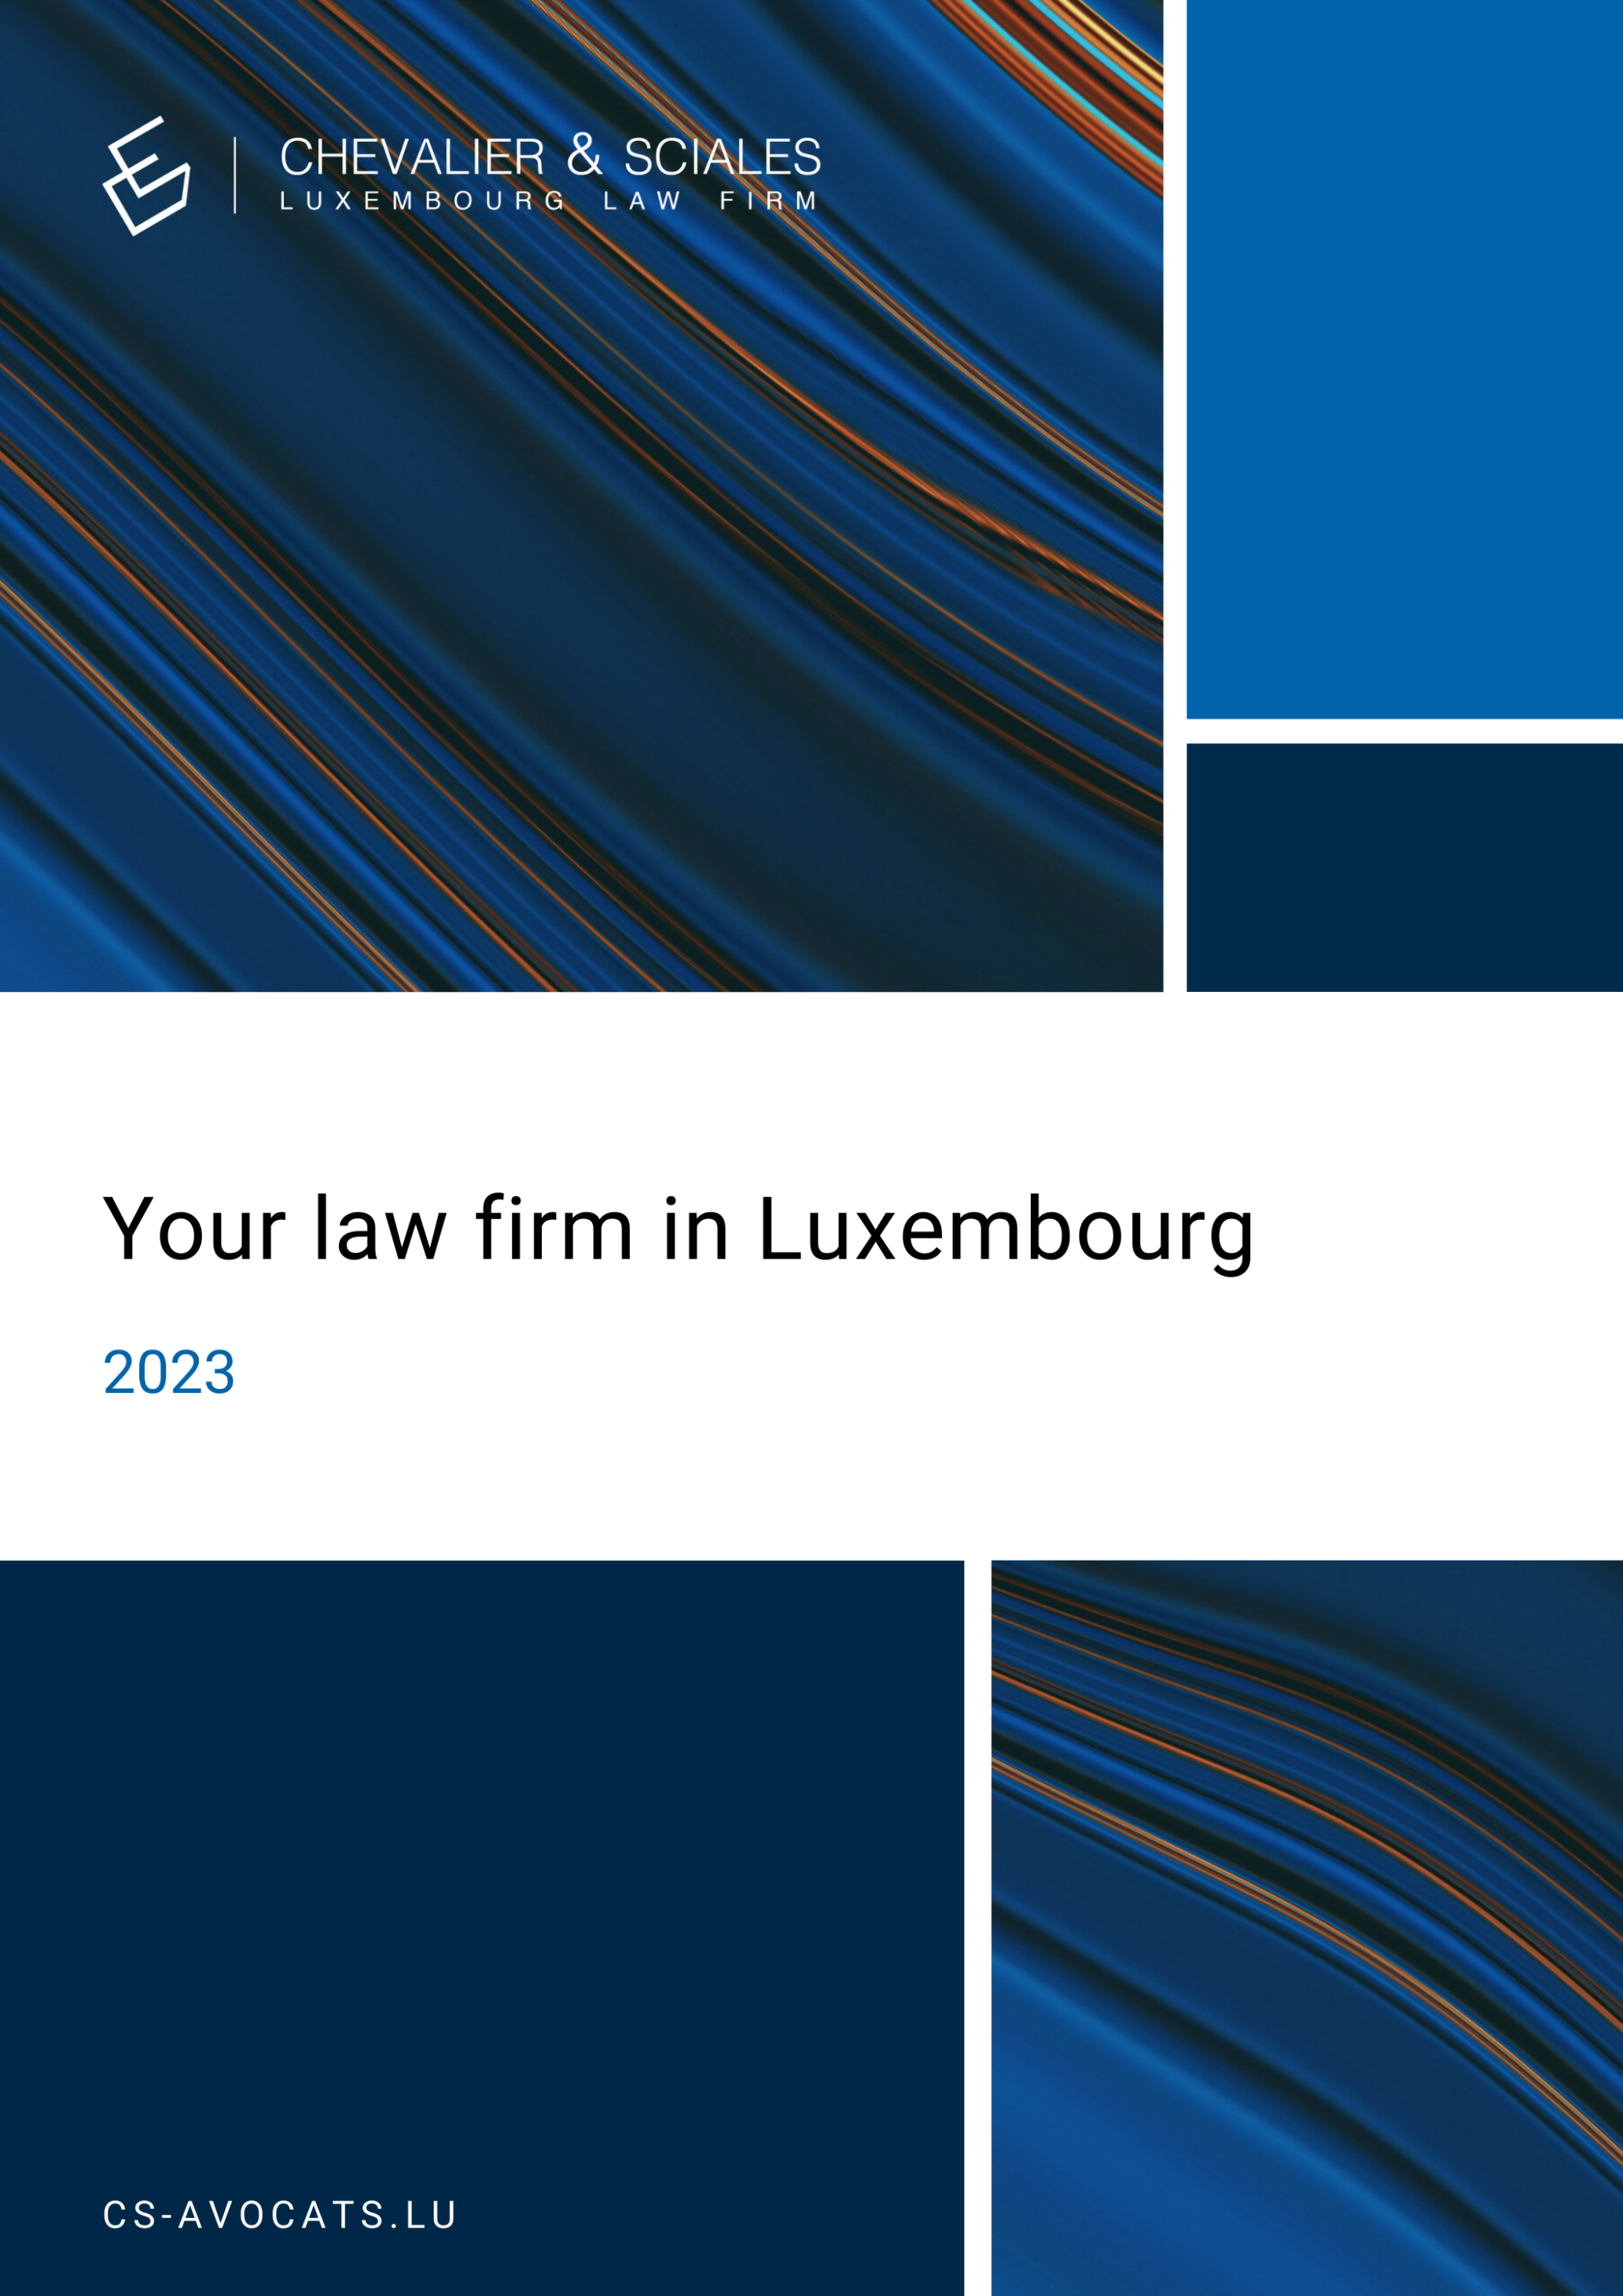 Planning Familial Luxembourg